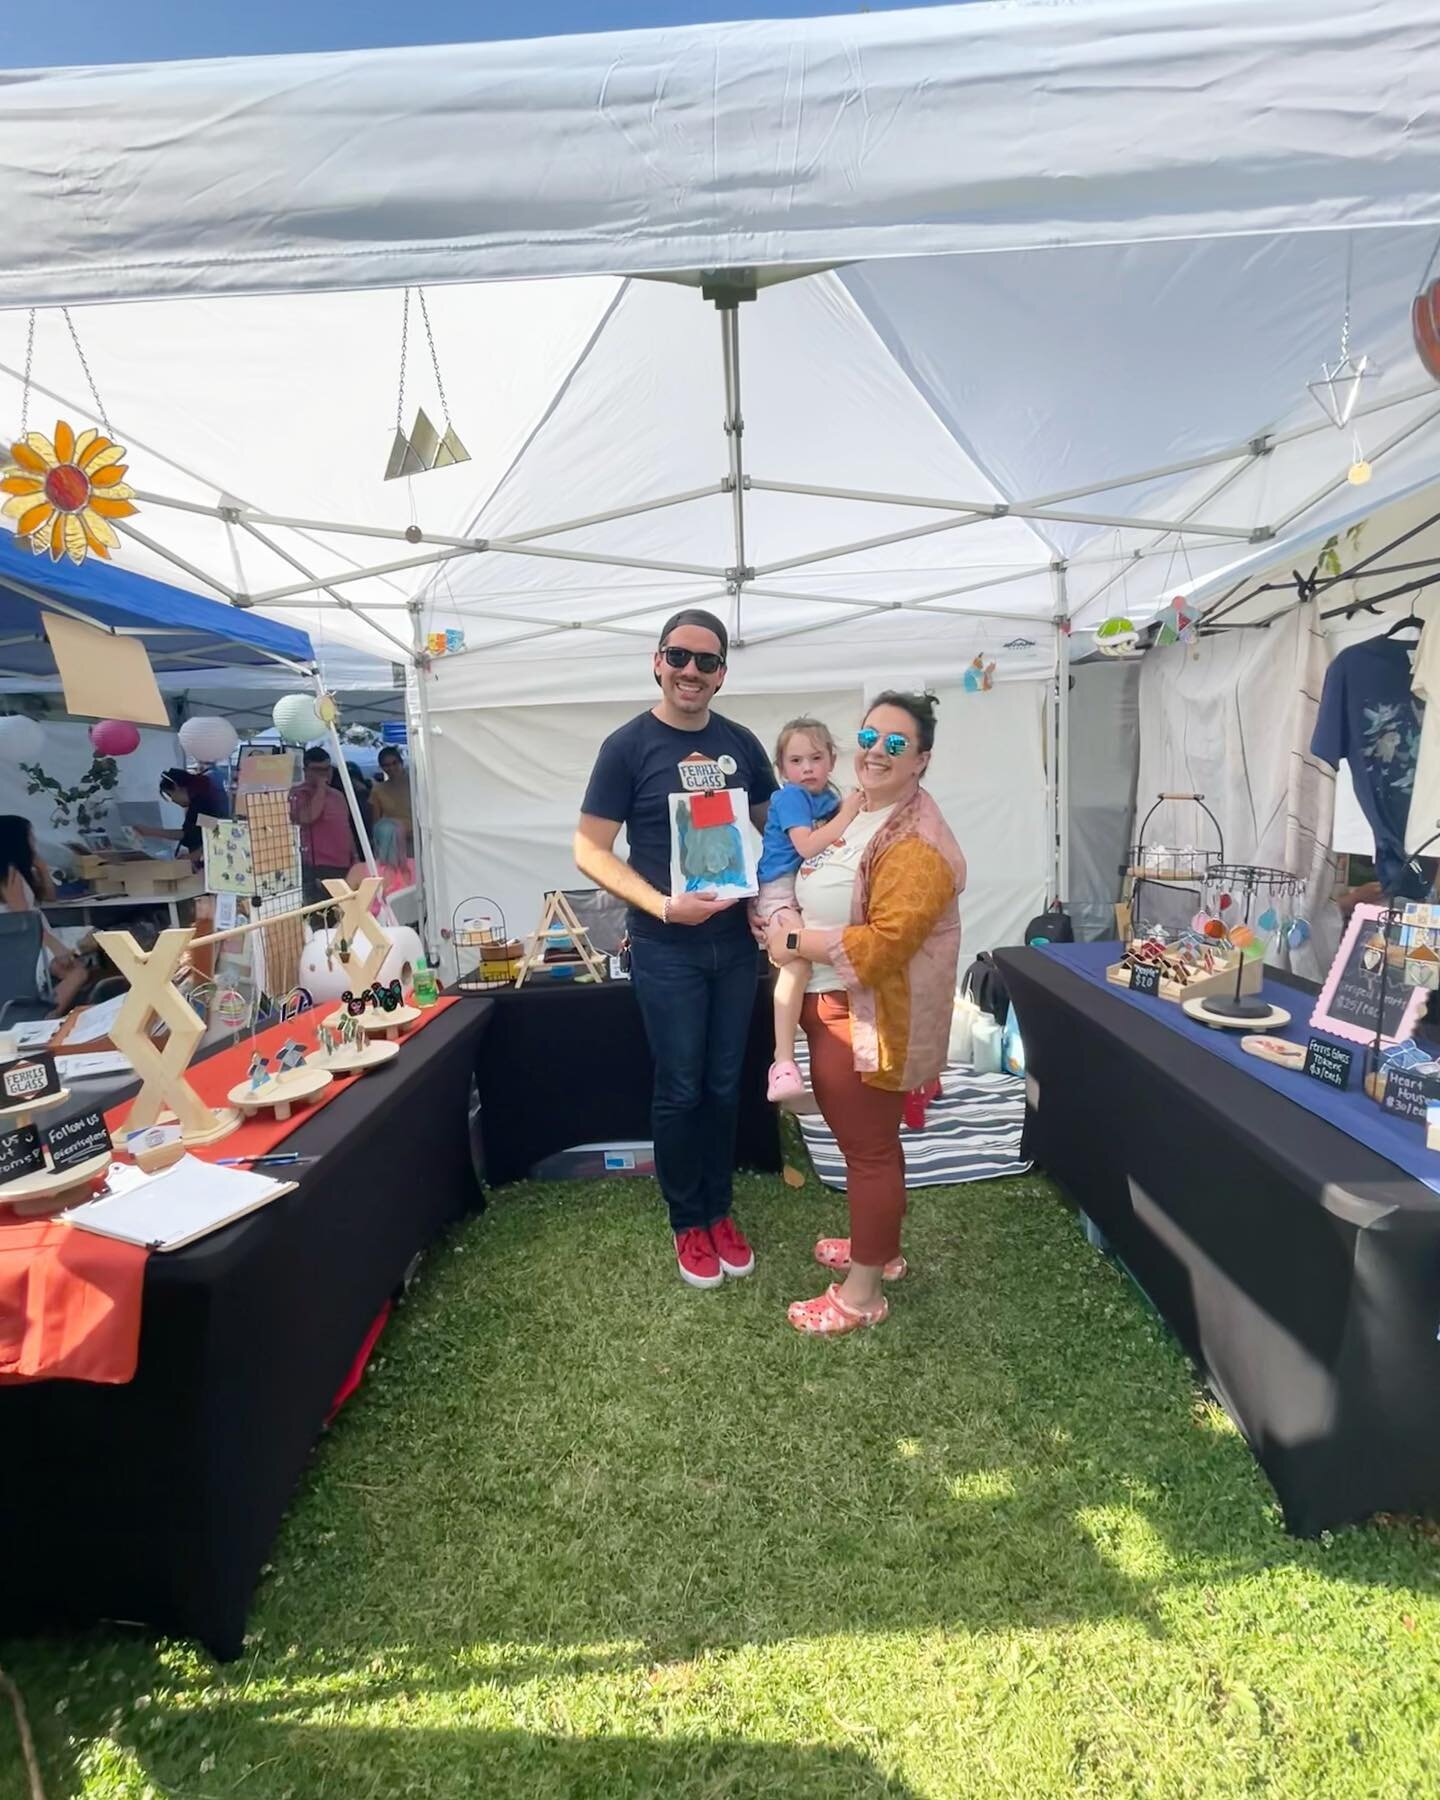 Thanks for having us again @jackalopeartfair !! We can&rsquo;t wait to be back in Burbank next month! Shoutout to the best booth buddies @brandonruiter and @rosestacey_art ✨✨ (cute shirt I&rsquo;m wearing is made by @boanderos ) 😍